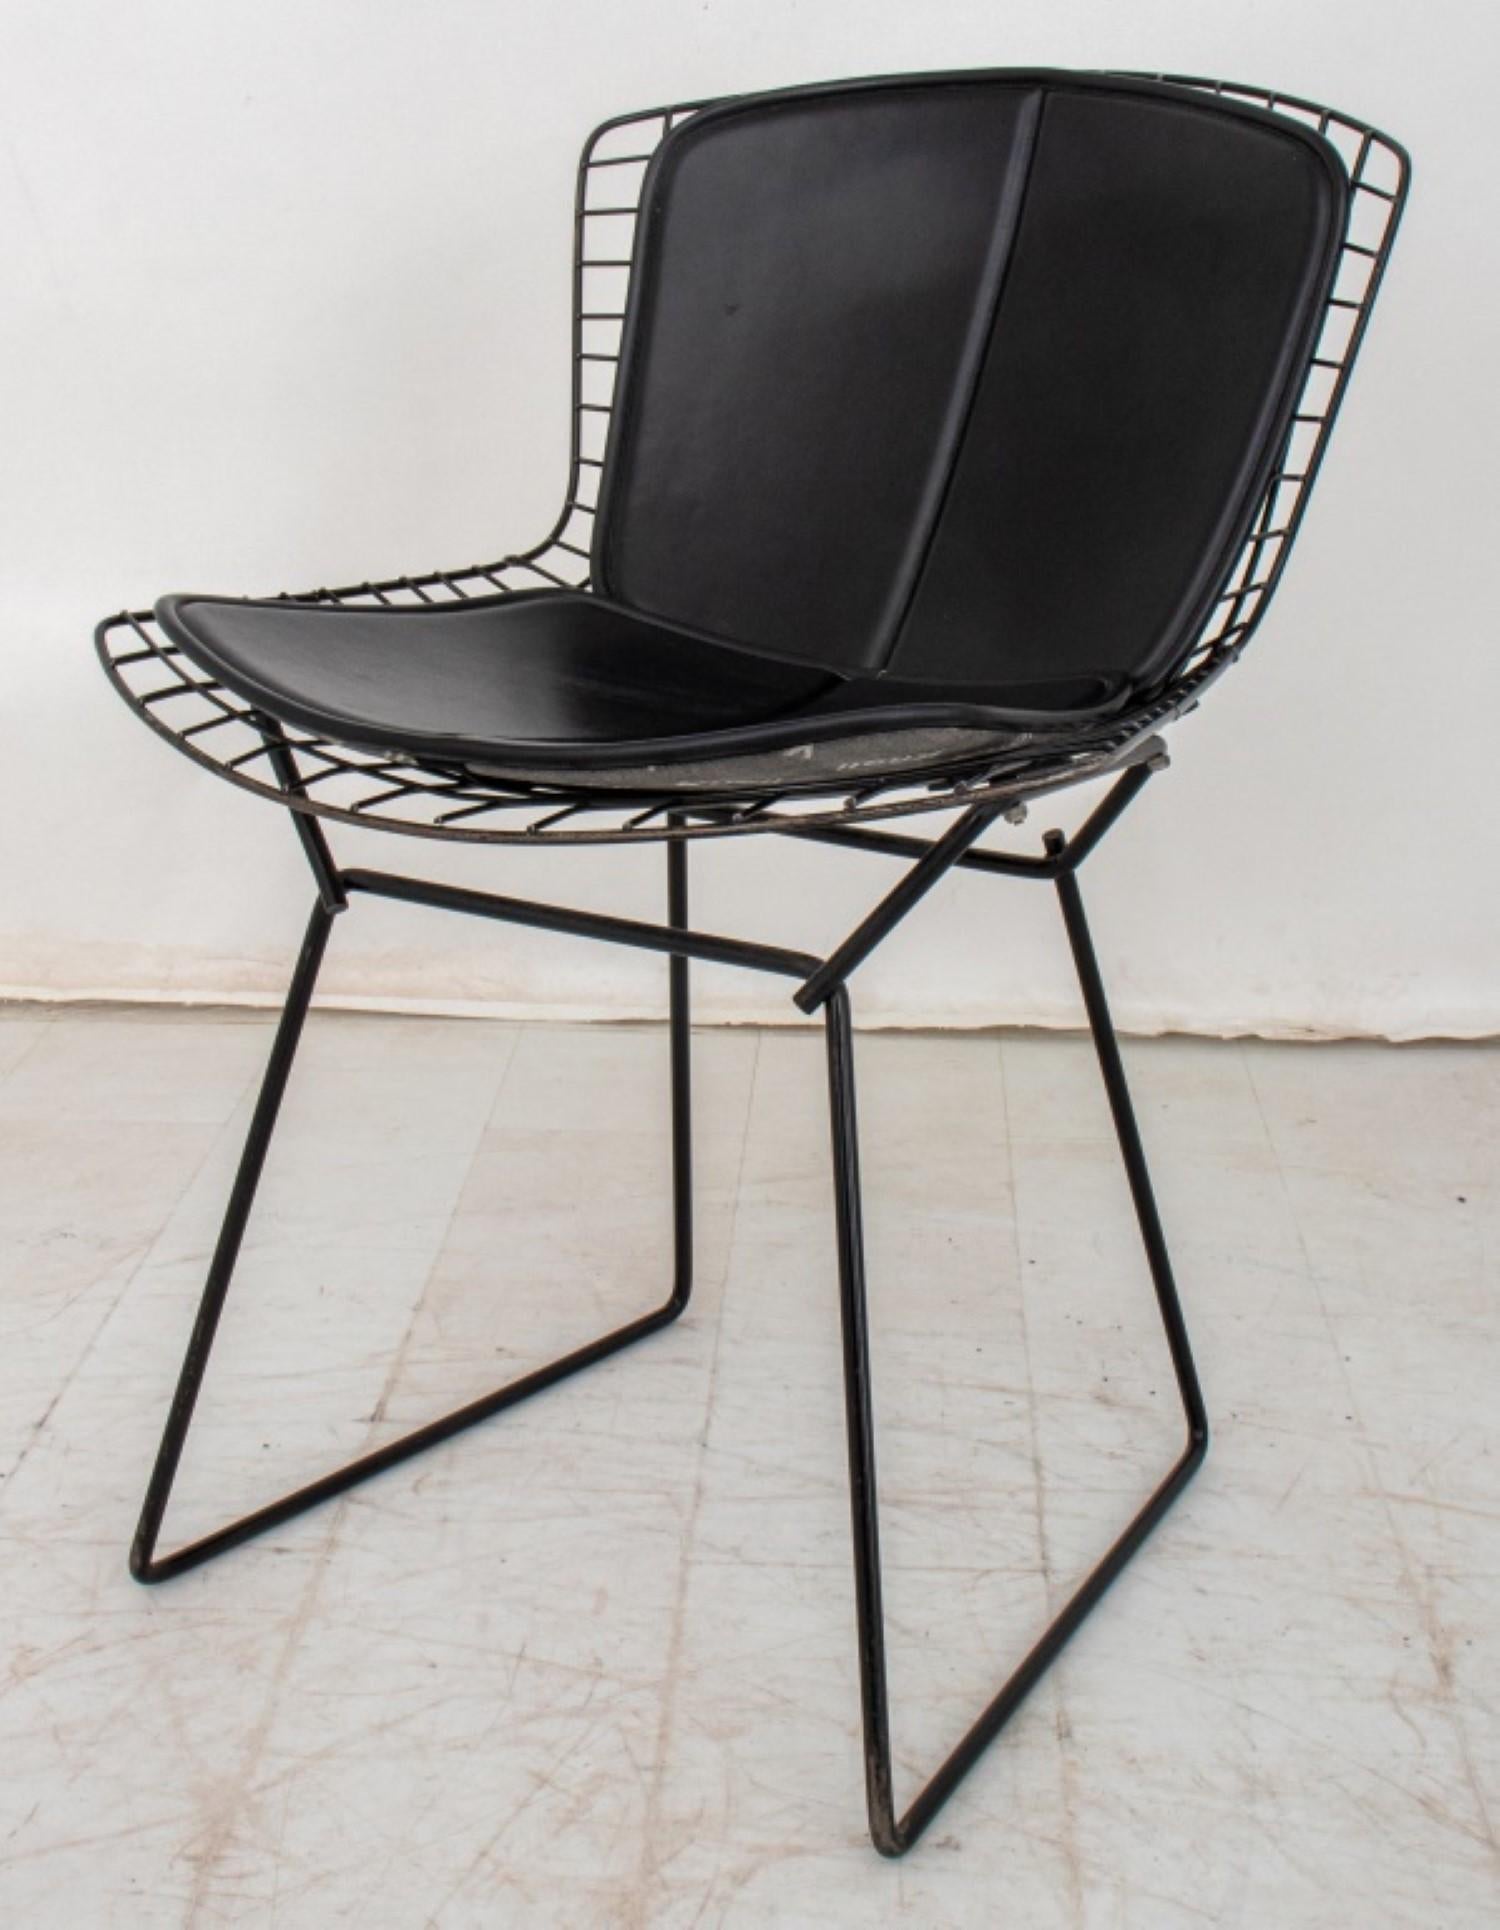 The Harry Bertoia Black Wire Chair for Knoll is a timeless piece of mid-century modern design. Its sculptural form, crafted from welded steel rods, has become an iconic symbol of the era.
Features:
Sculptural Design: The chair's unique form,